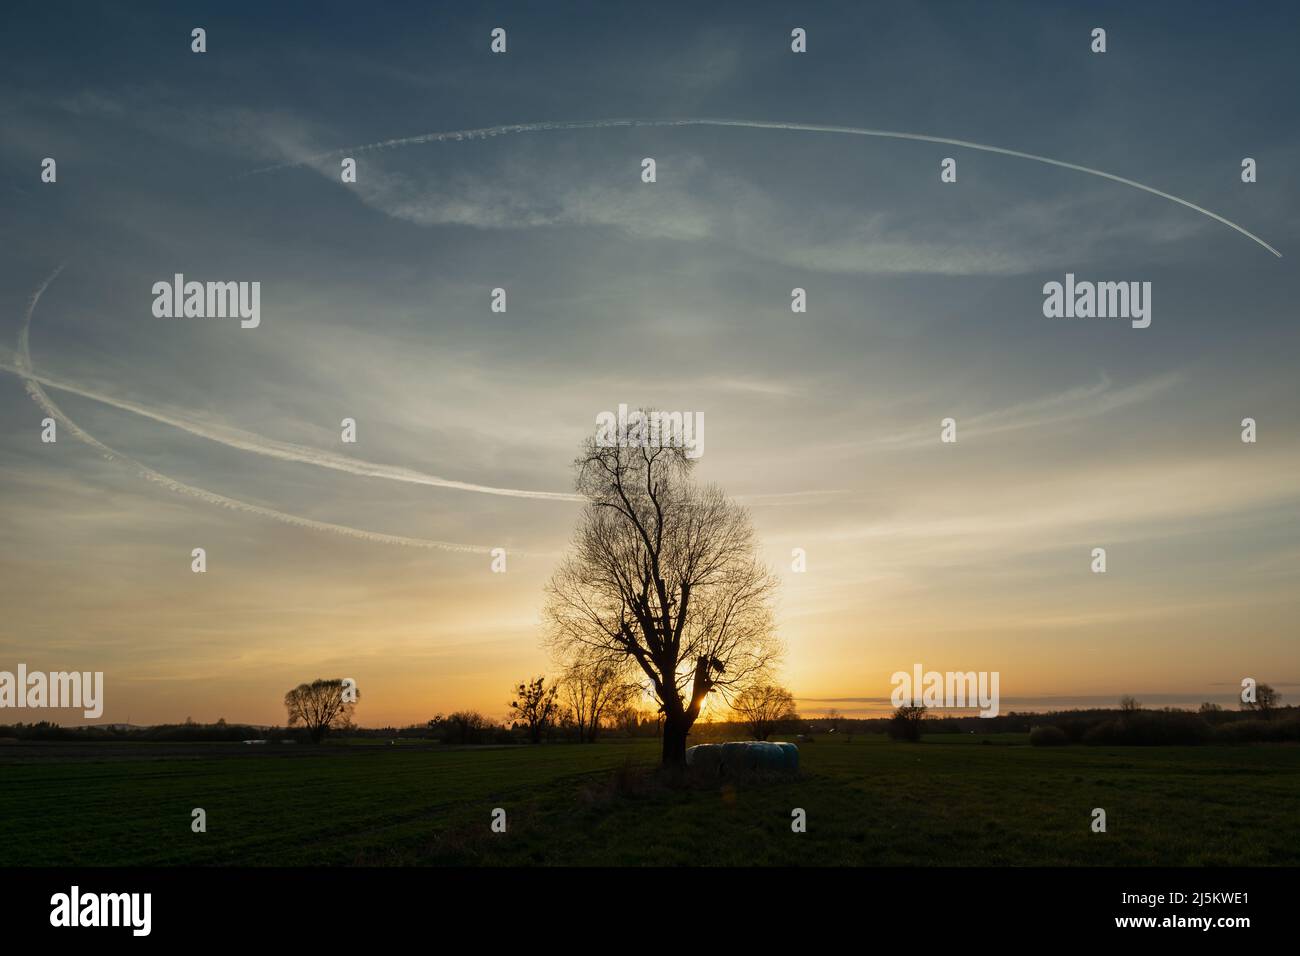 Circular condensation streak over a tree on a meadow during sunset Stock Photo